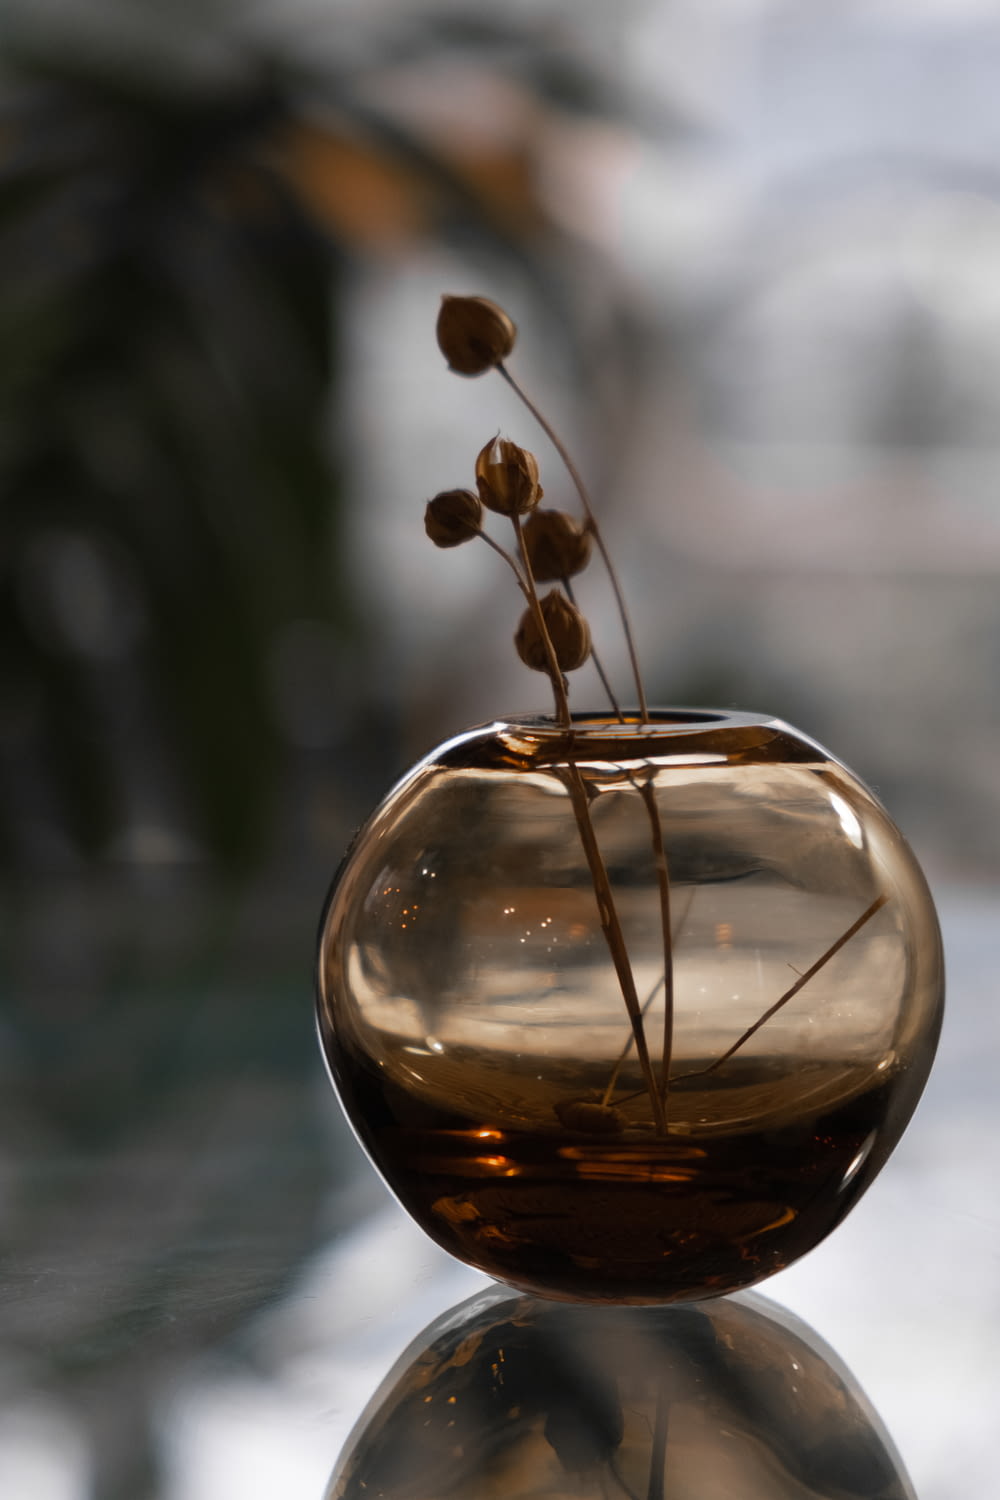 clear glass ball with brown plant